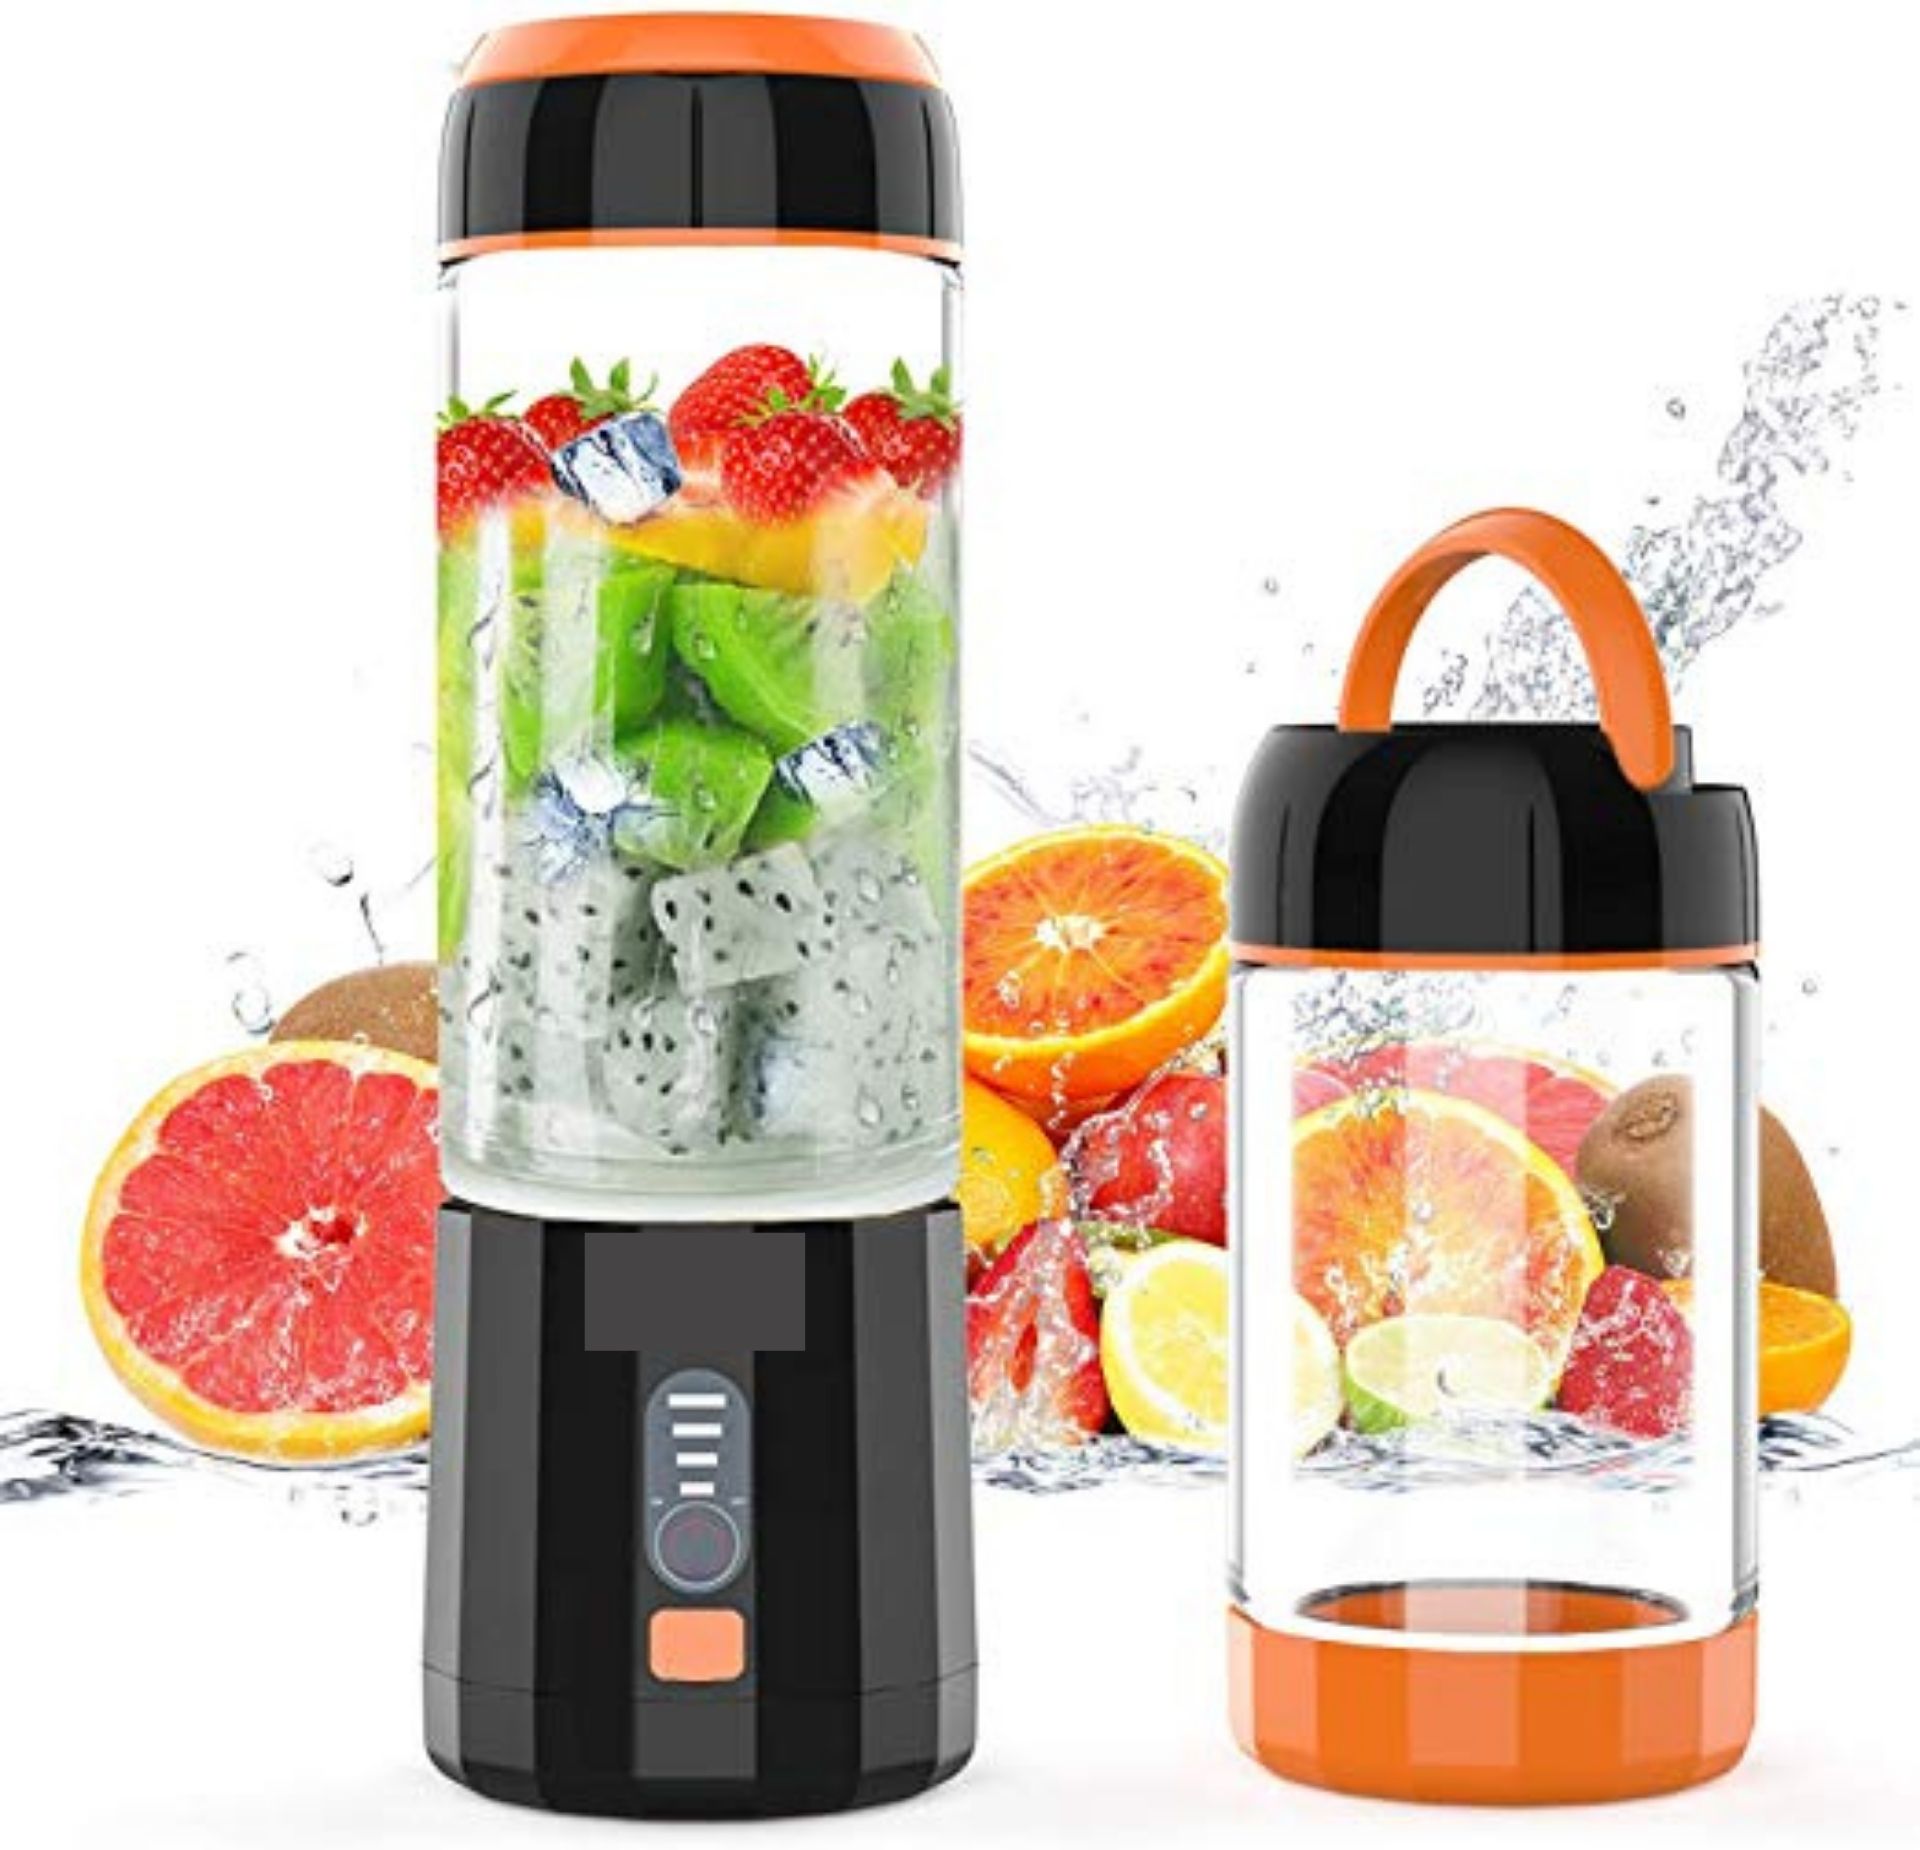 G-Ting Portable Blender Review (2023): Is it Worth Buying? Answered